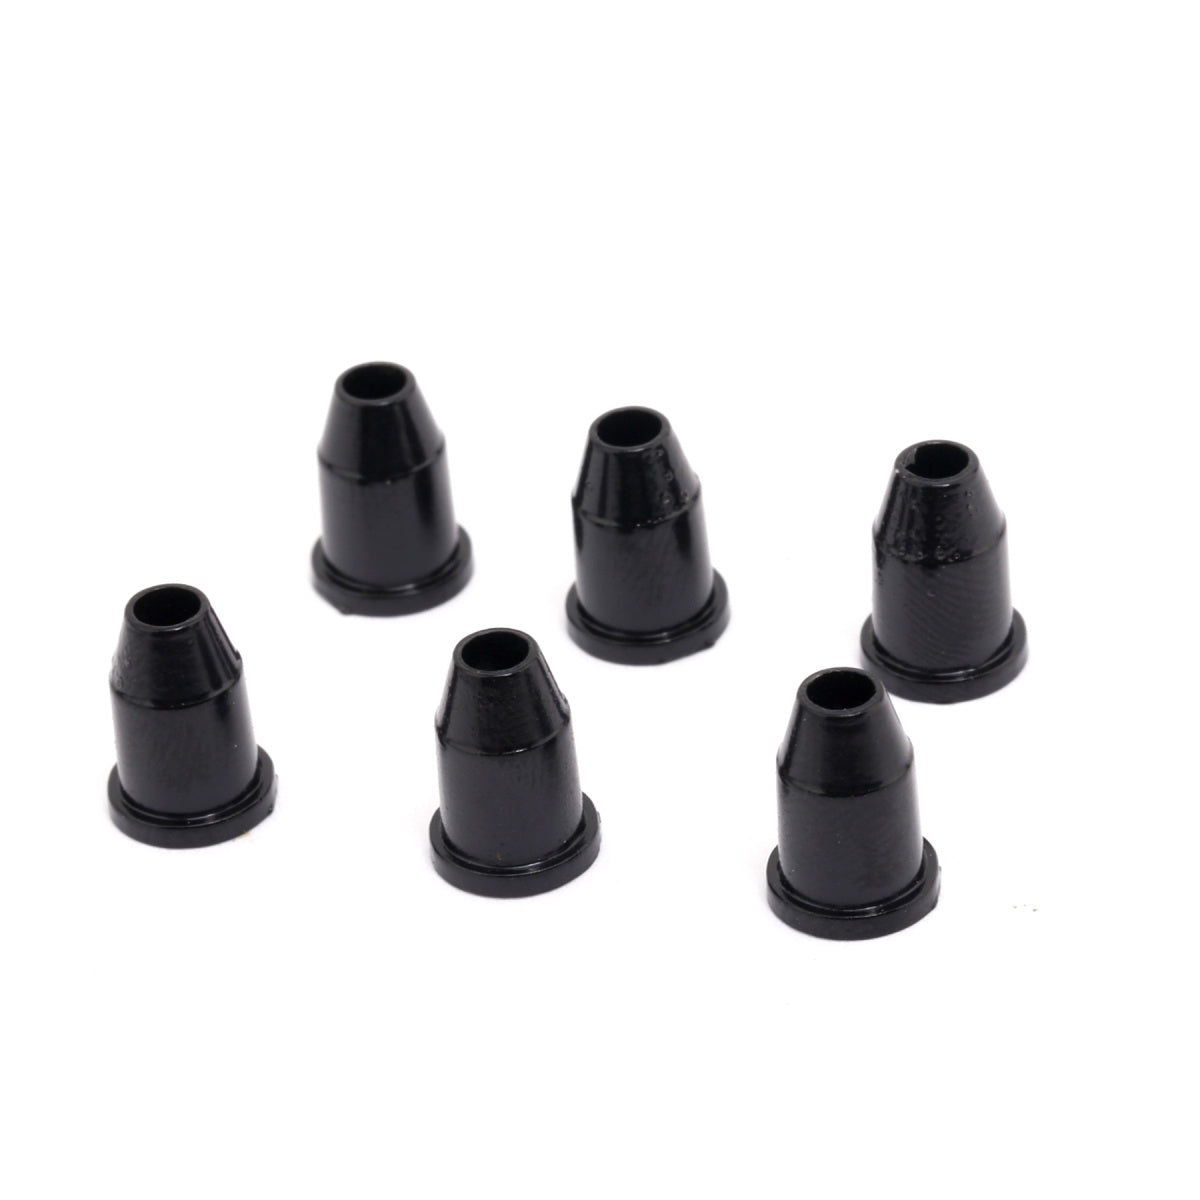 Musiclily Vintage Guitar Through Body Smooth String Mounting Ferrules, Black(6 Pieces)